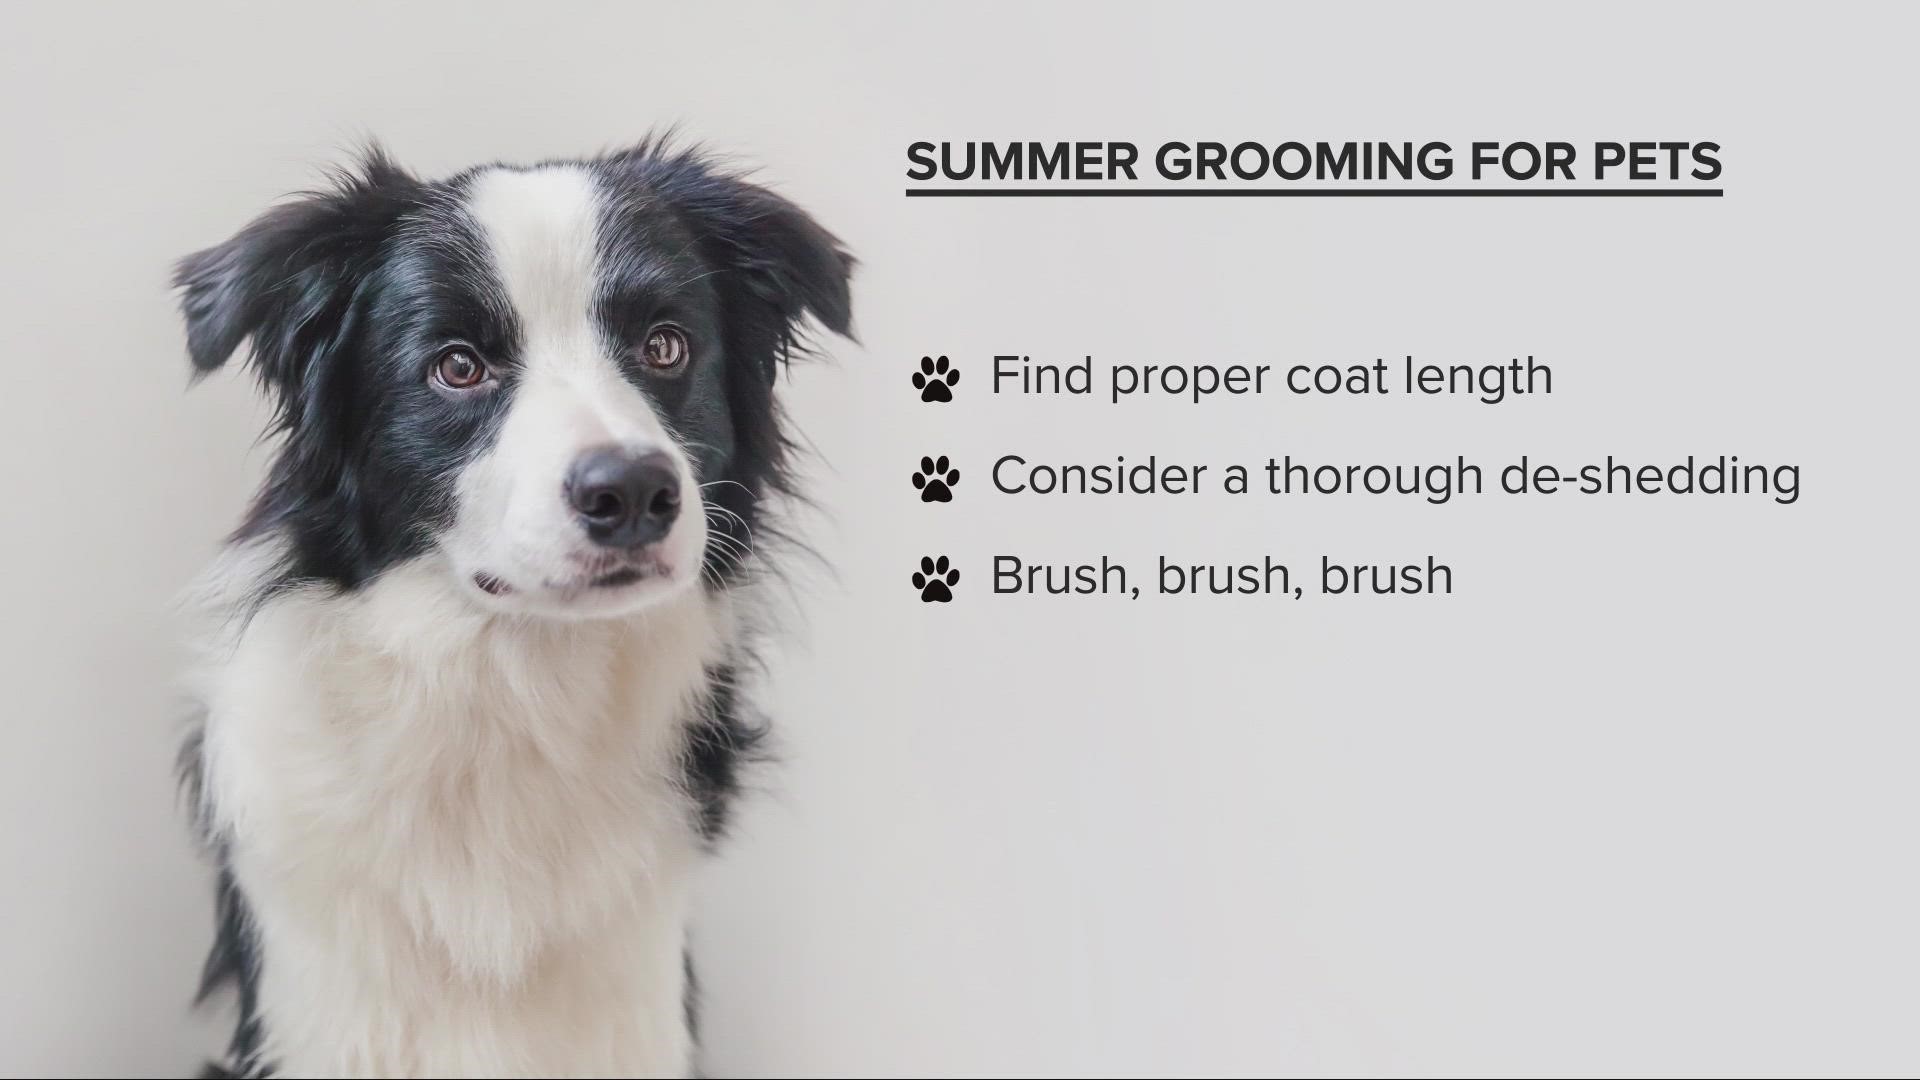 Don't forget to keep your dog properly groomed during the summer heat.